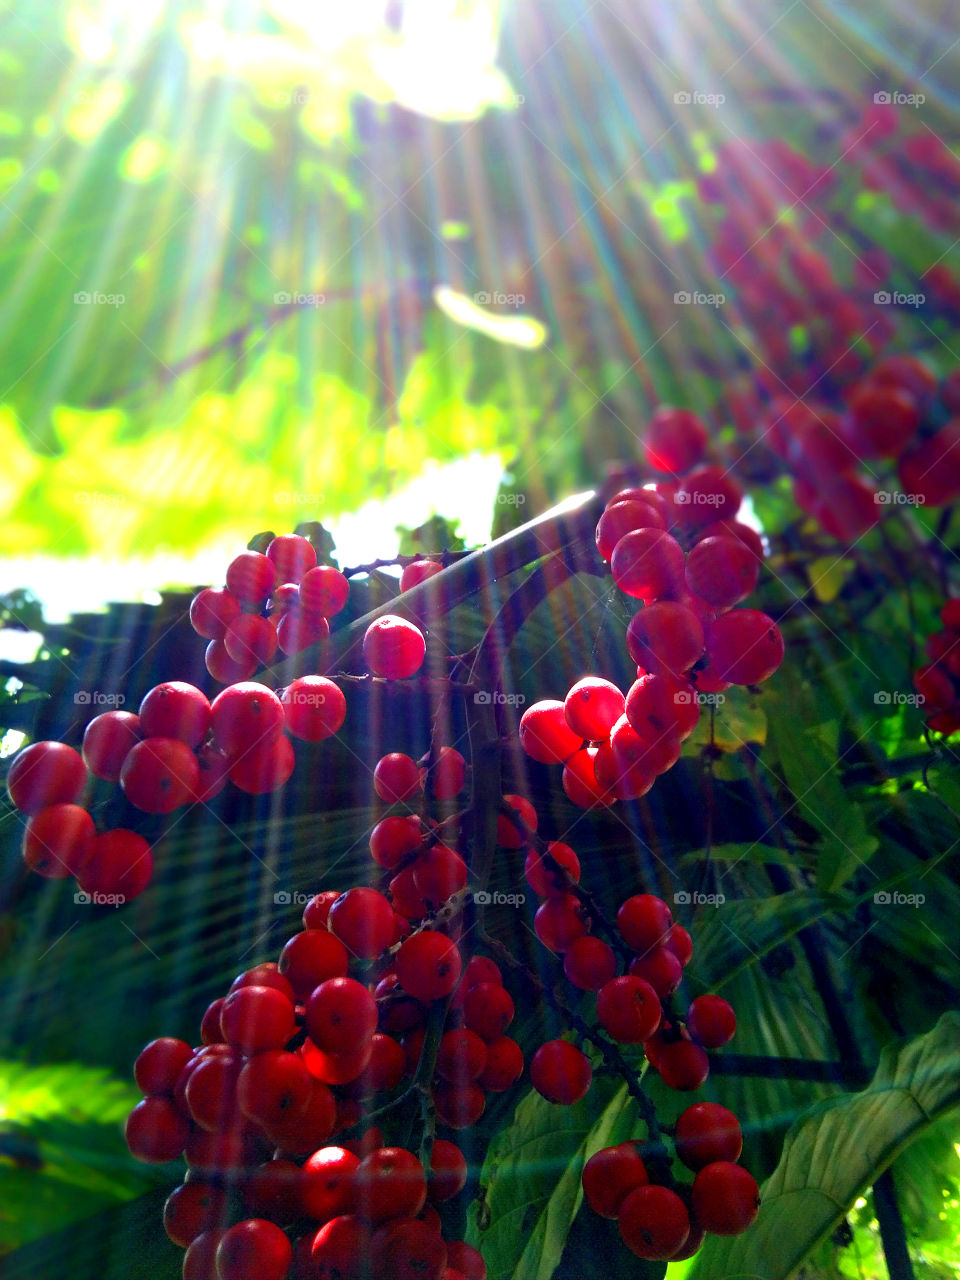 Red fruits beautify the environment.  When the sun shines on them, strange patterns form.